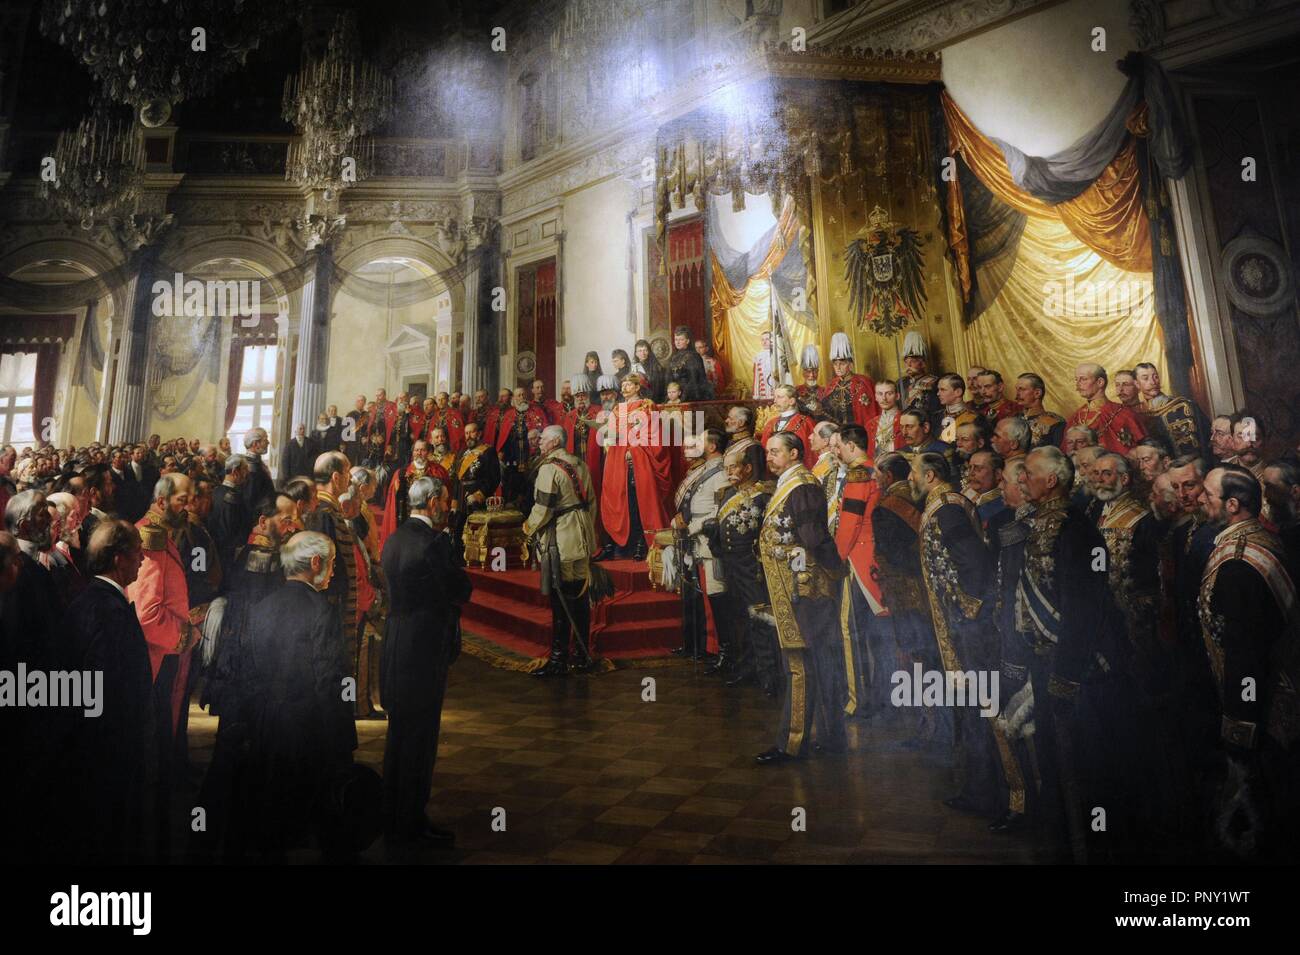 The Opening of the German Reichstag in the White Hall of the Berlin Schloss by Kaiser Wilhelm II on June 25, 1888. Detail. Painting finished in 1893 by Anton Von Werner (1843-1915). German Historical Museum, Berlin. Germany. Stock Photo